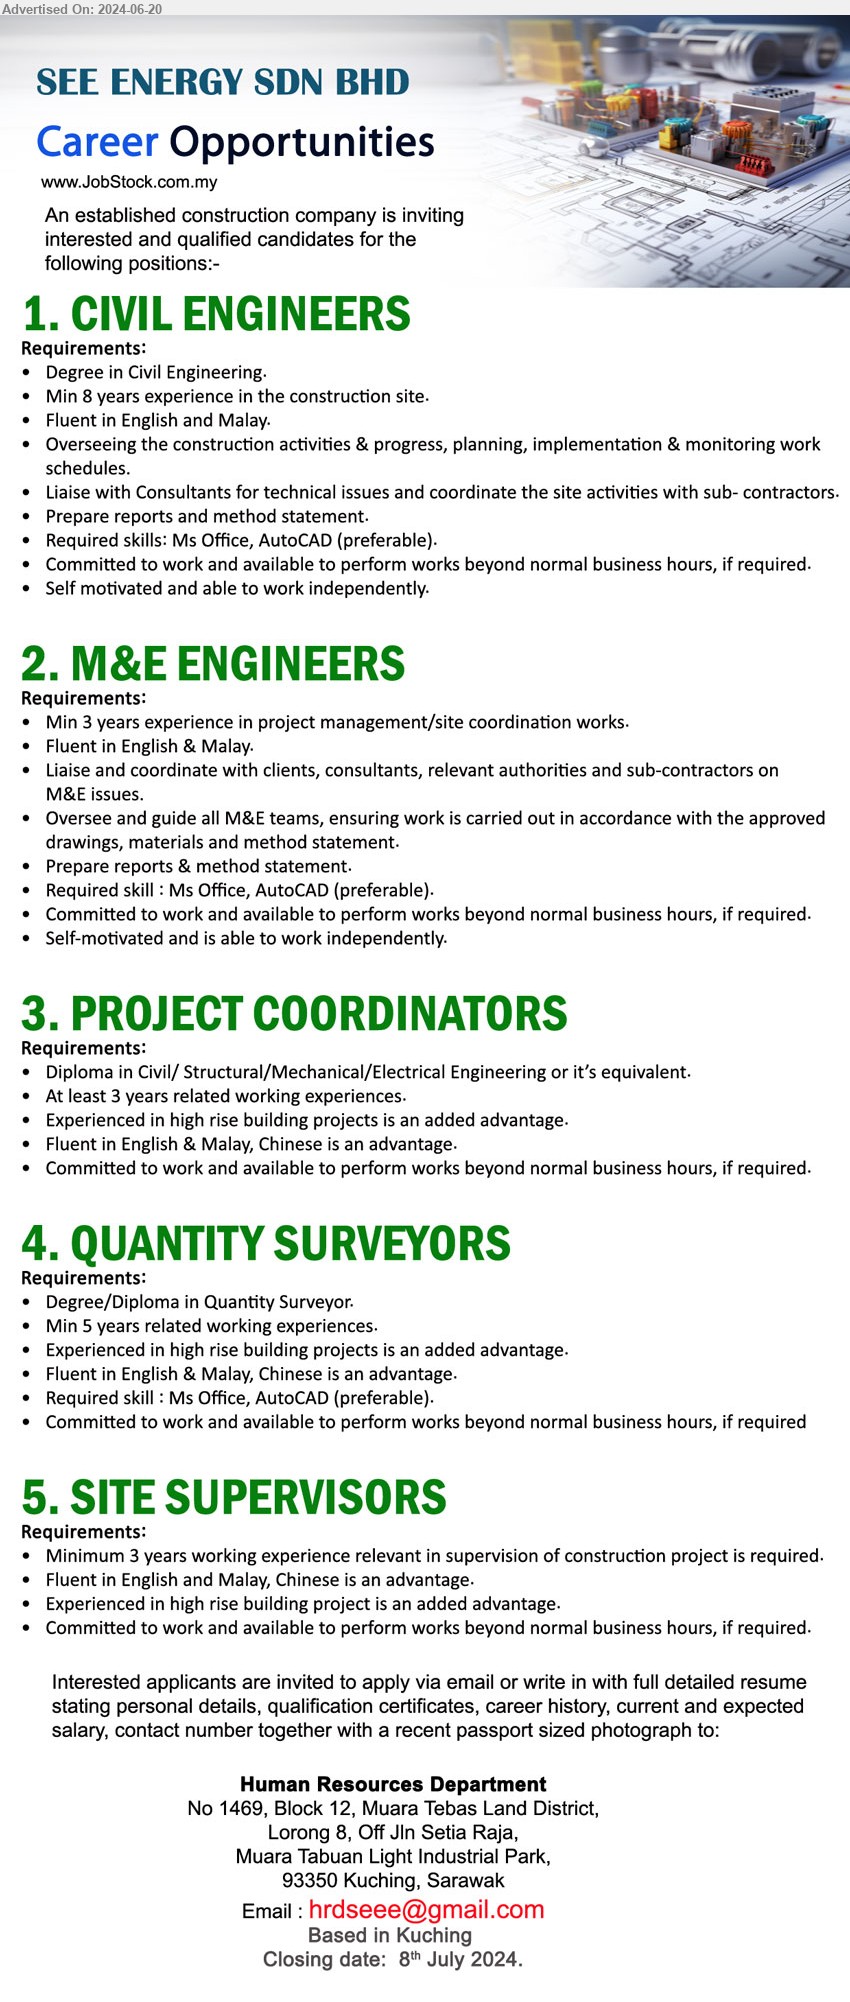 SEE ENERGY SDN BHD - 1. CIVIL ENGINEERS (Kuching), Degree in Civil Engineering, Min 8 years experience in the construction site.,...
2. M&E ENGINEERS  (Kuching), Min 3 years experience in project management/site coordination works.,...
3. PROJECT COORDINATORS (Kuching), Diploma in Civil/ Structural/Mechanical/Electrical Engineering,...
4. QUANTITY SURVEYORS  (Kuching), Degree/Diploma in Quantity Surveyor, Required skill : Ms Office, AutoCAD (preferable),...
5. SITE SUPERVISORS (Kuching), Minimum 3 years working experience relevant in supervision of construction project is required,...
Email resume to ...